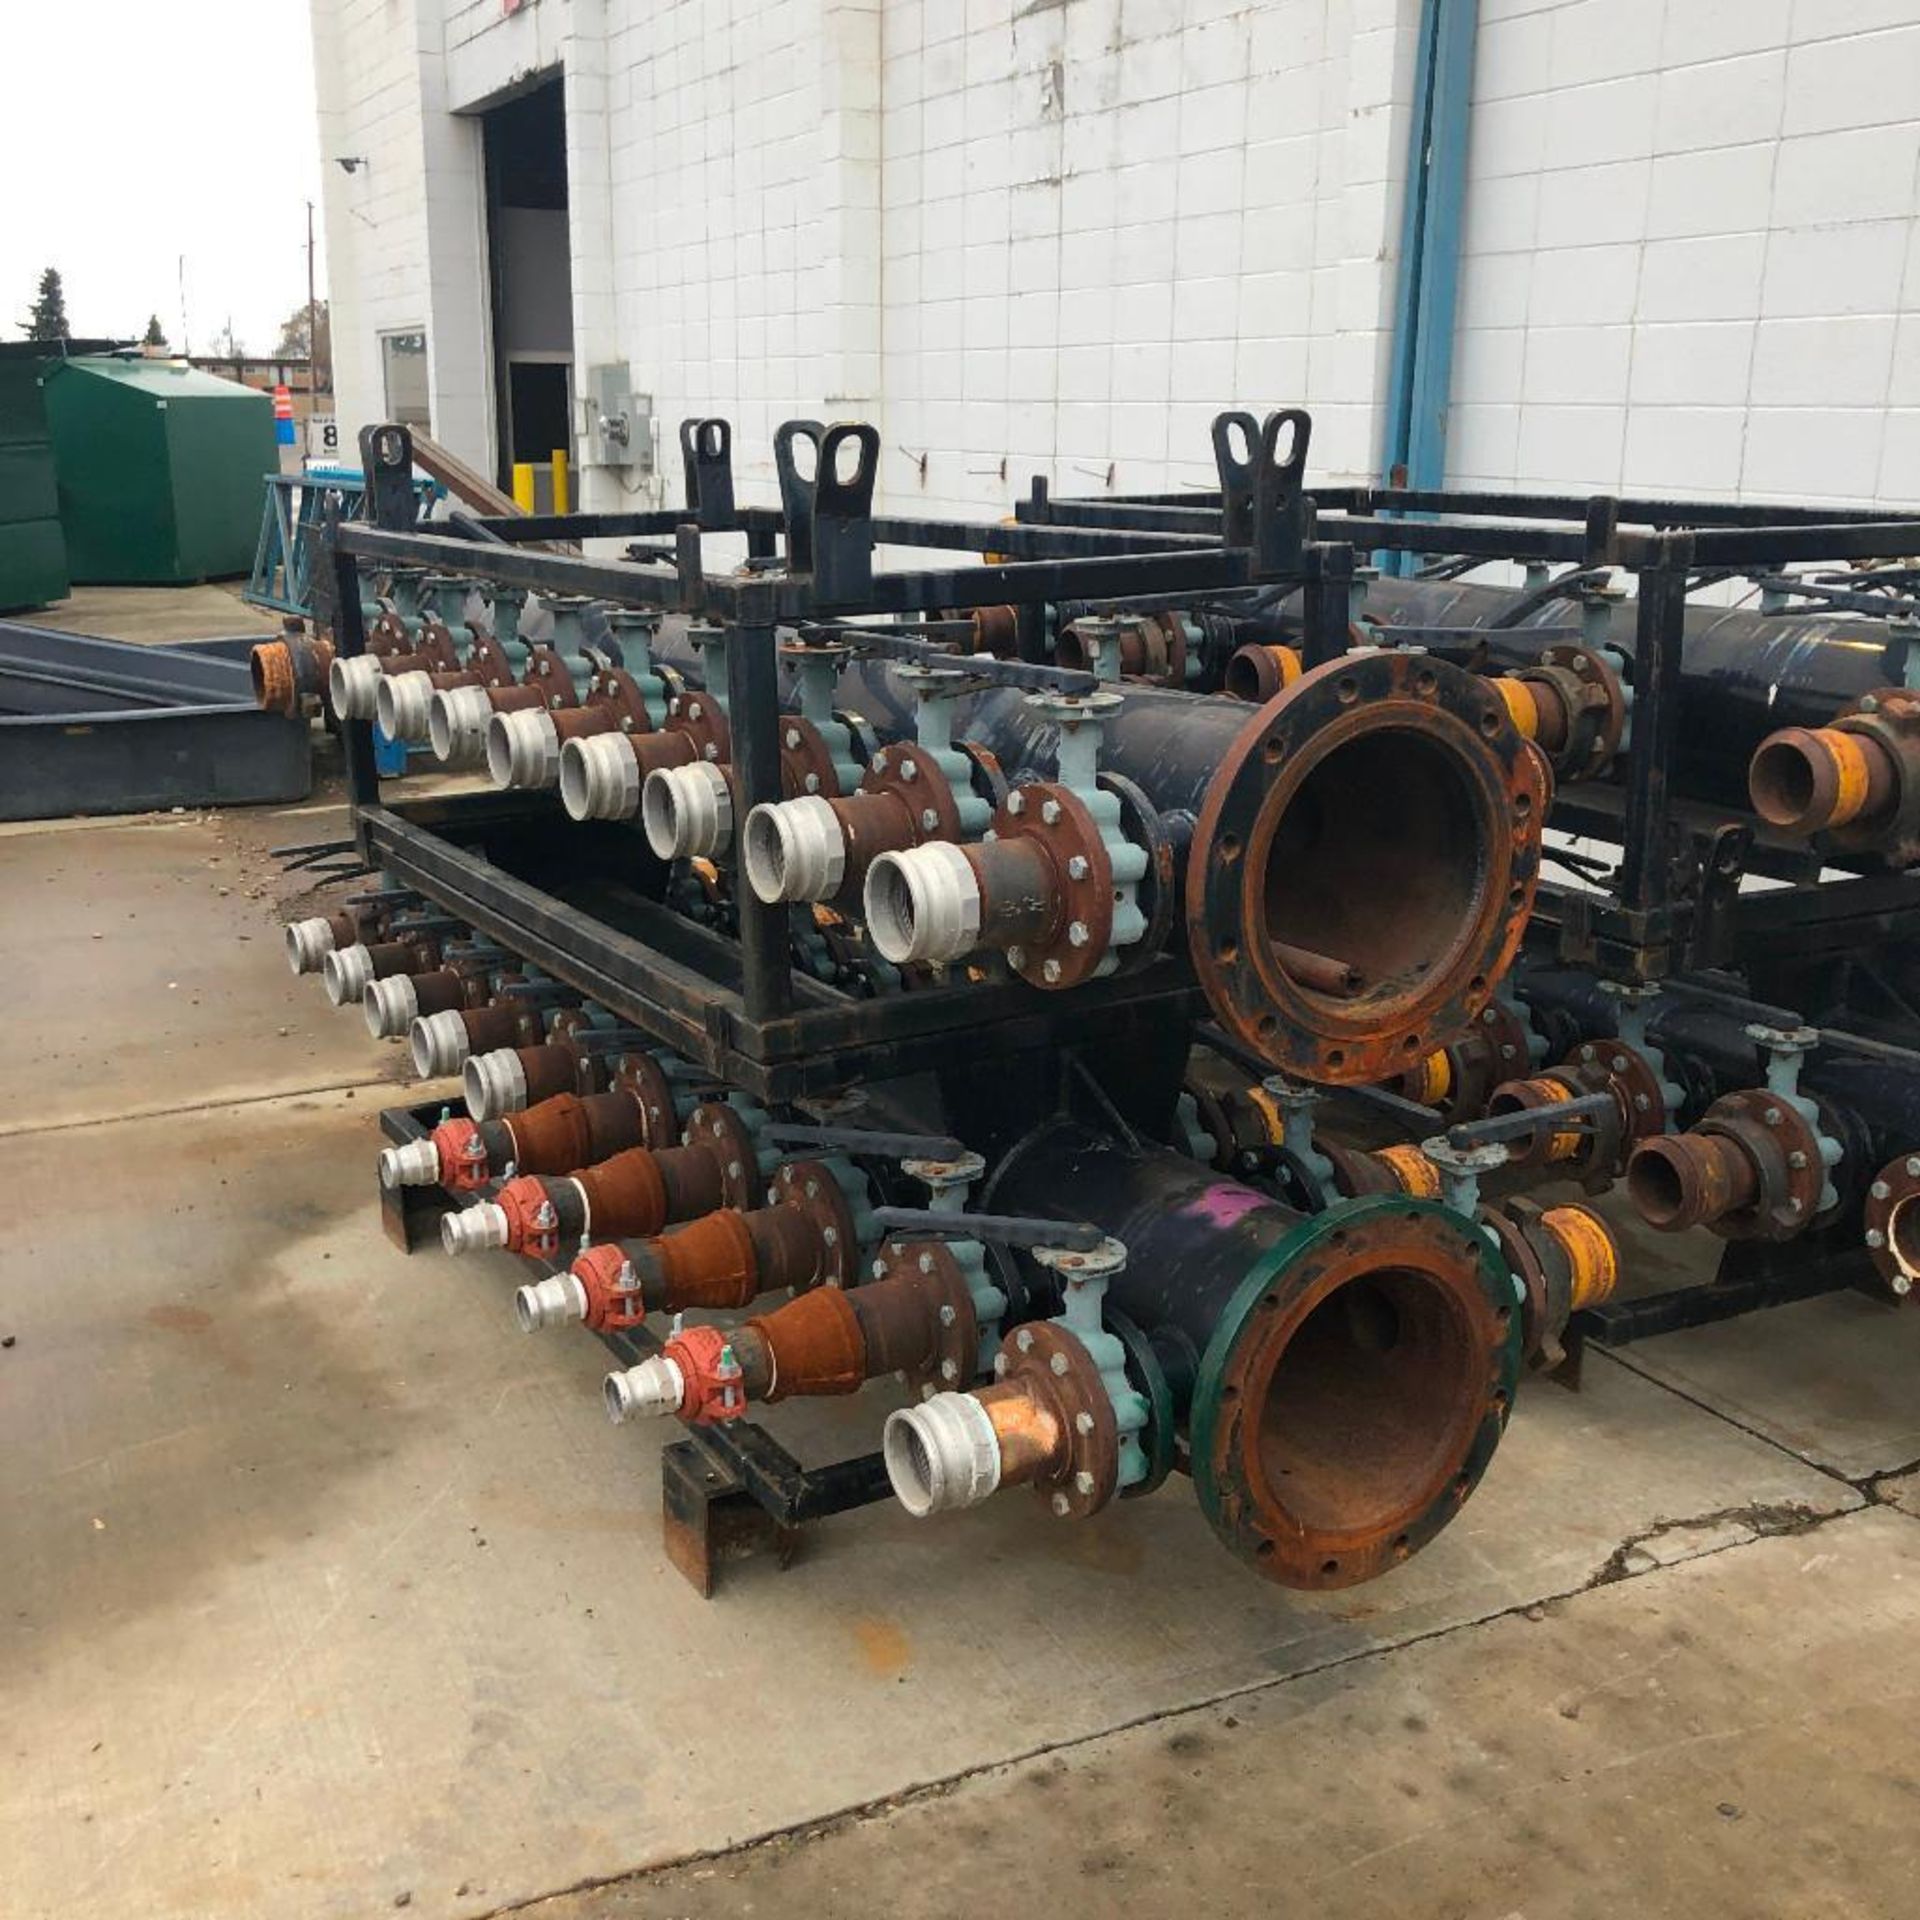 Lot of 4 Asst. Test Headers - Image 4 of 4